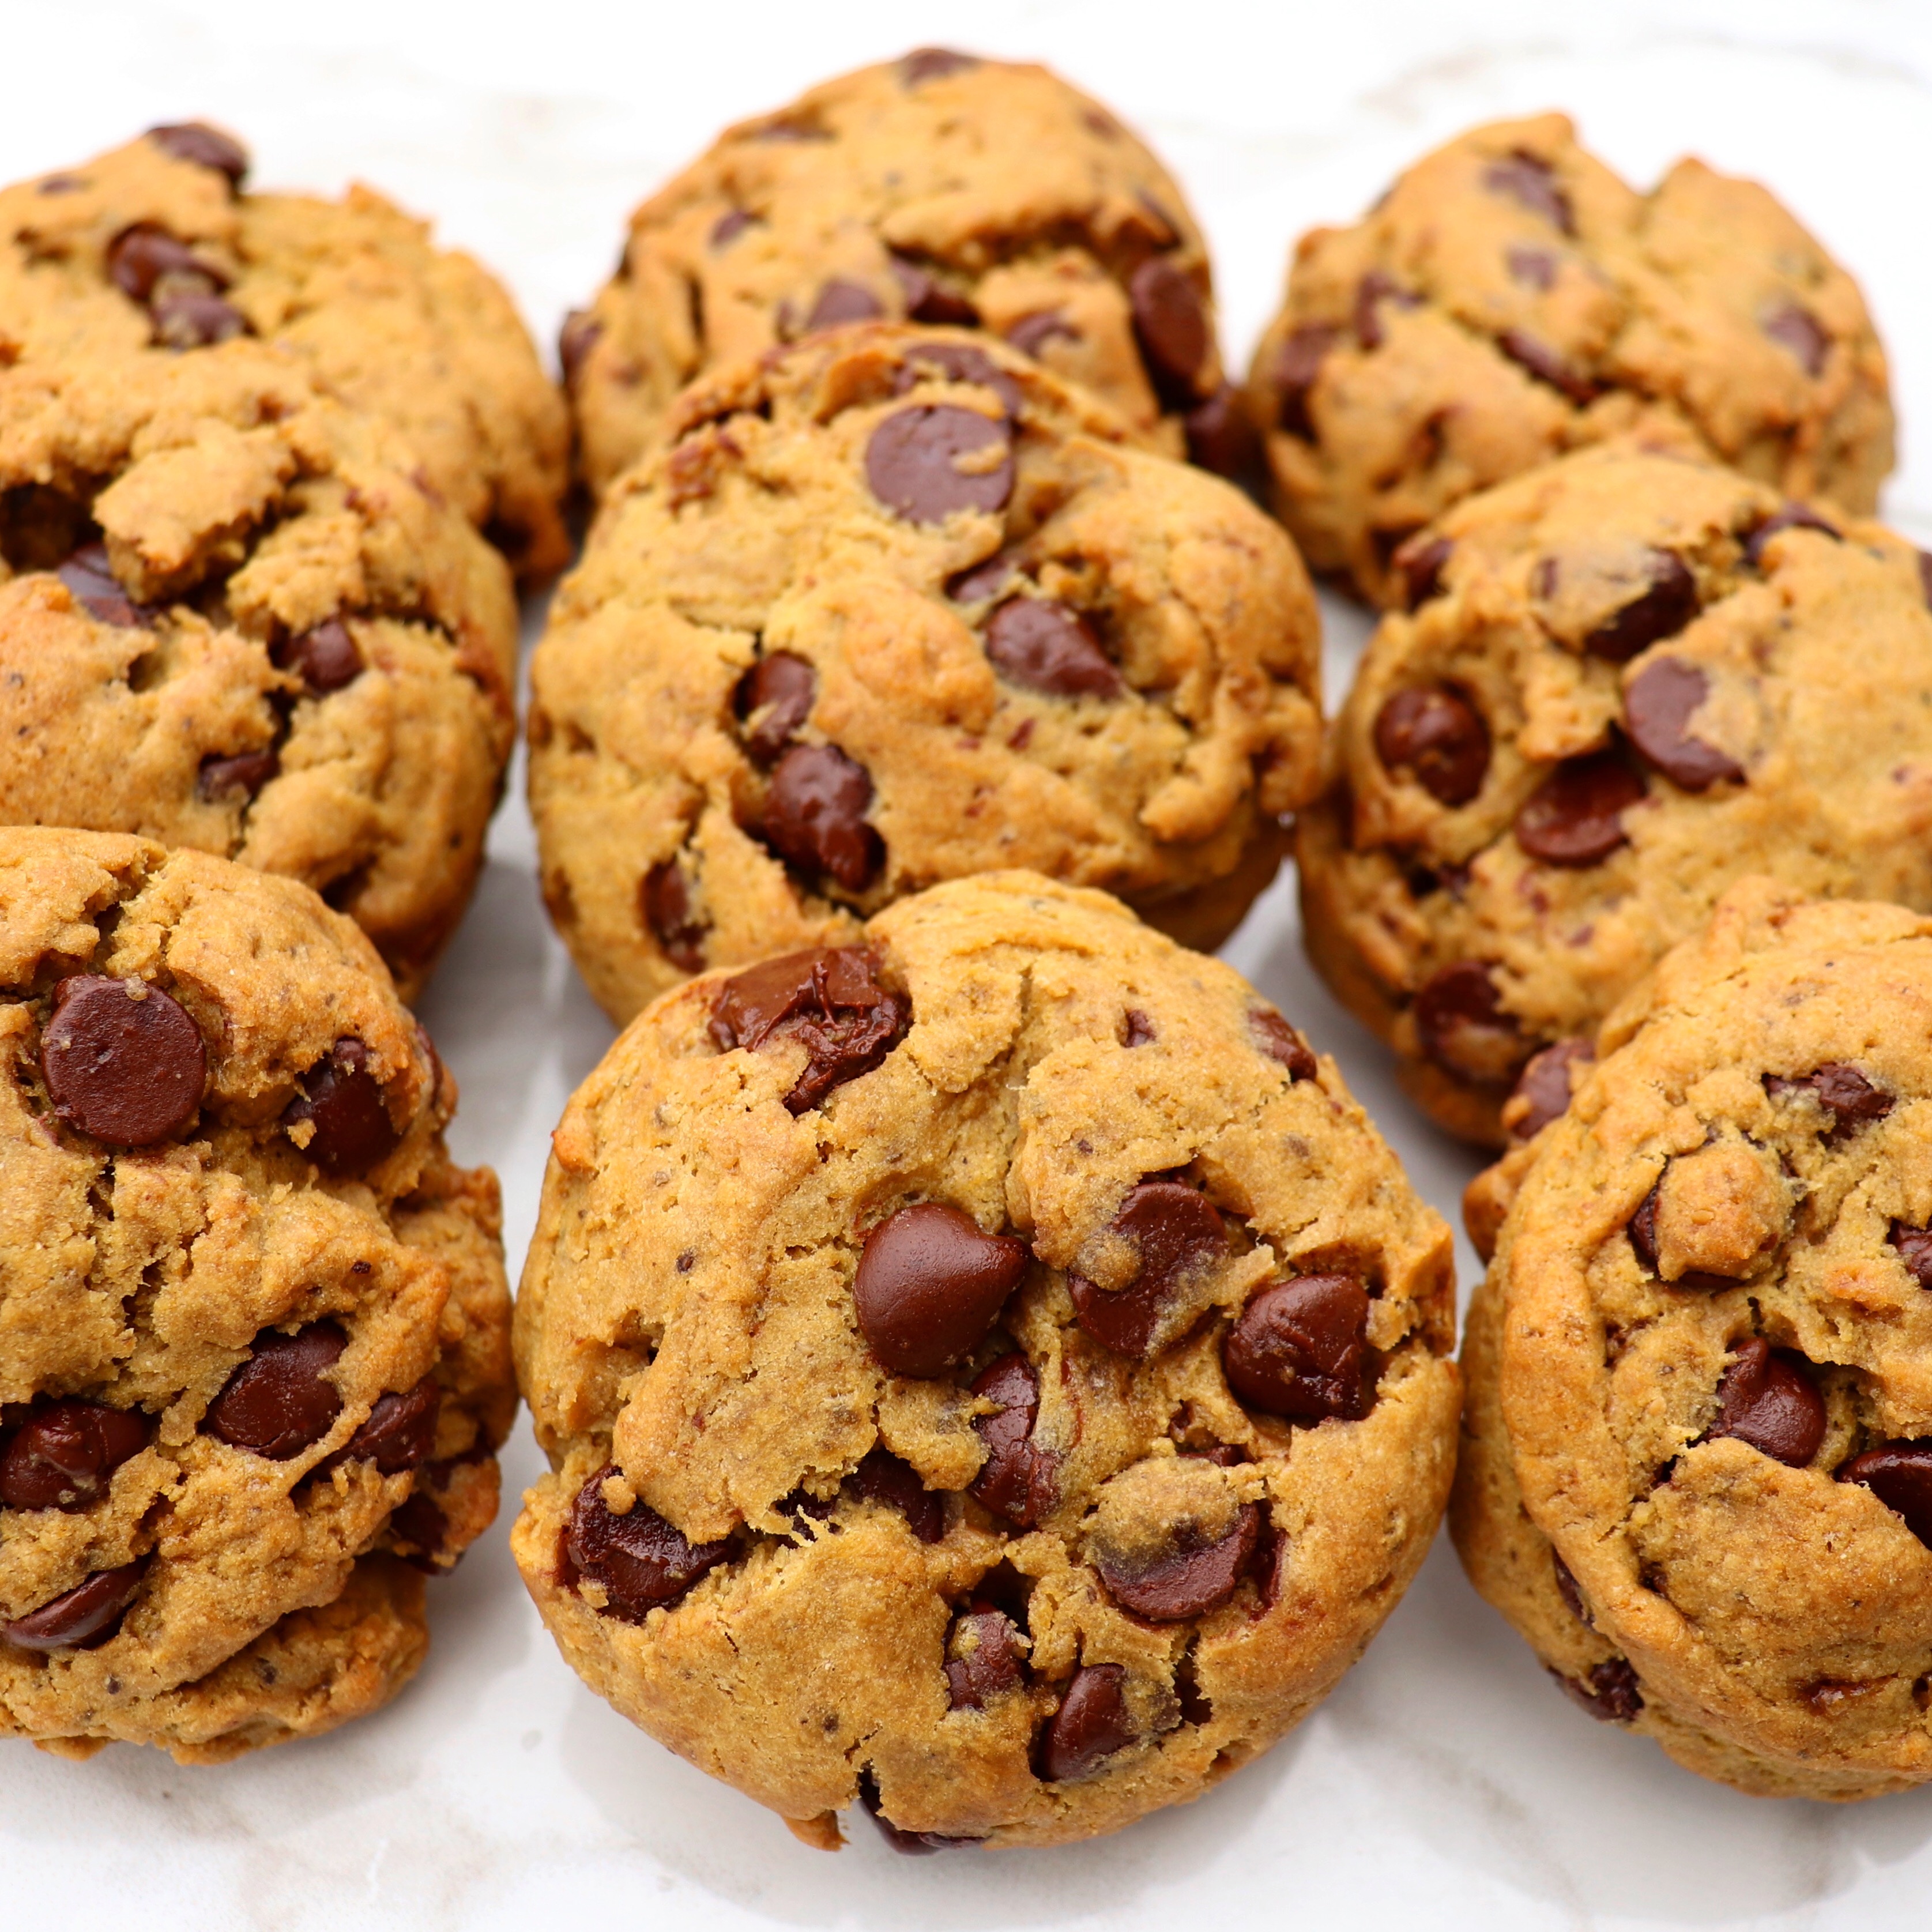 https://mostlydomestic.com/wp-content/uploads/2019/07/how-to-make-chocolate-chip-cookies-vegan-gluten-free-sugar-free-healthy-mostly-domestic-blog.jpeg